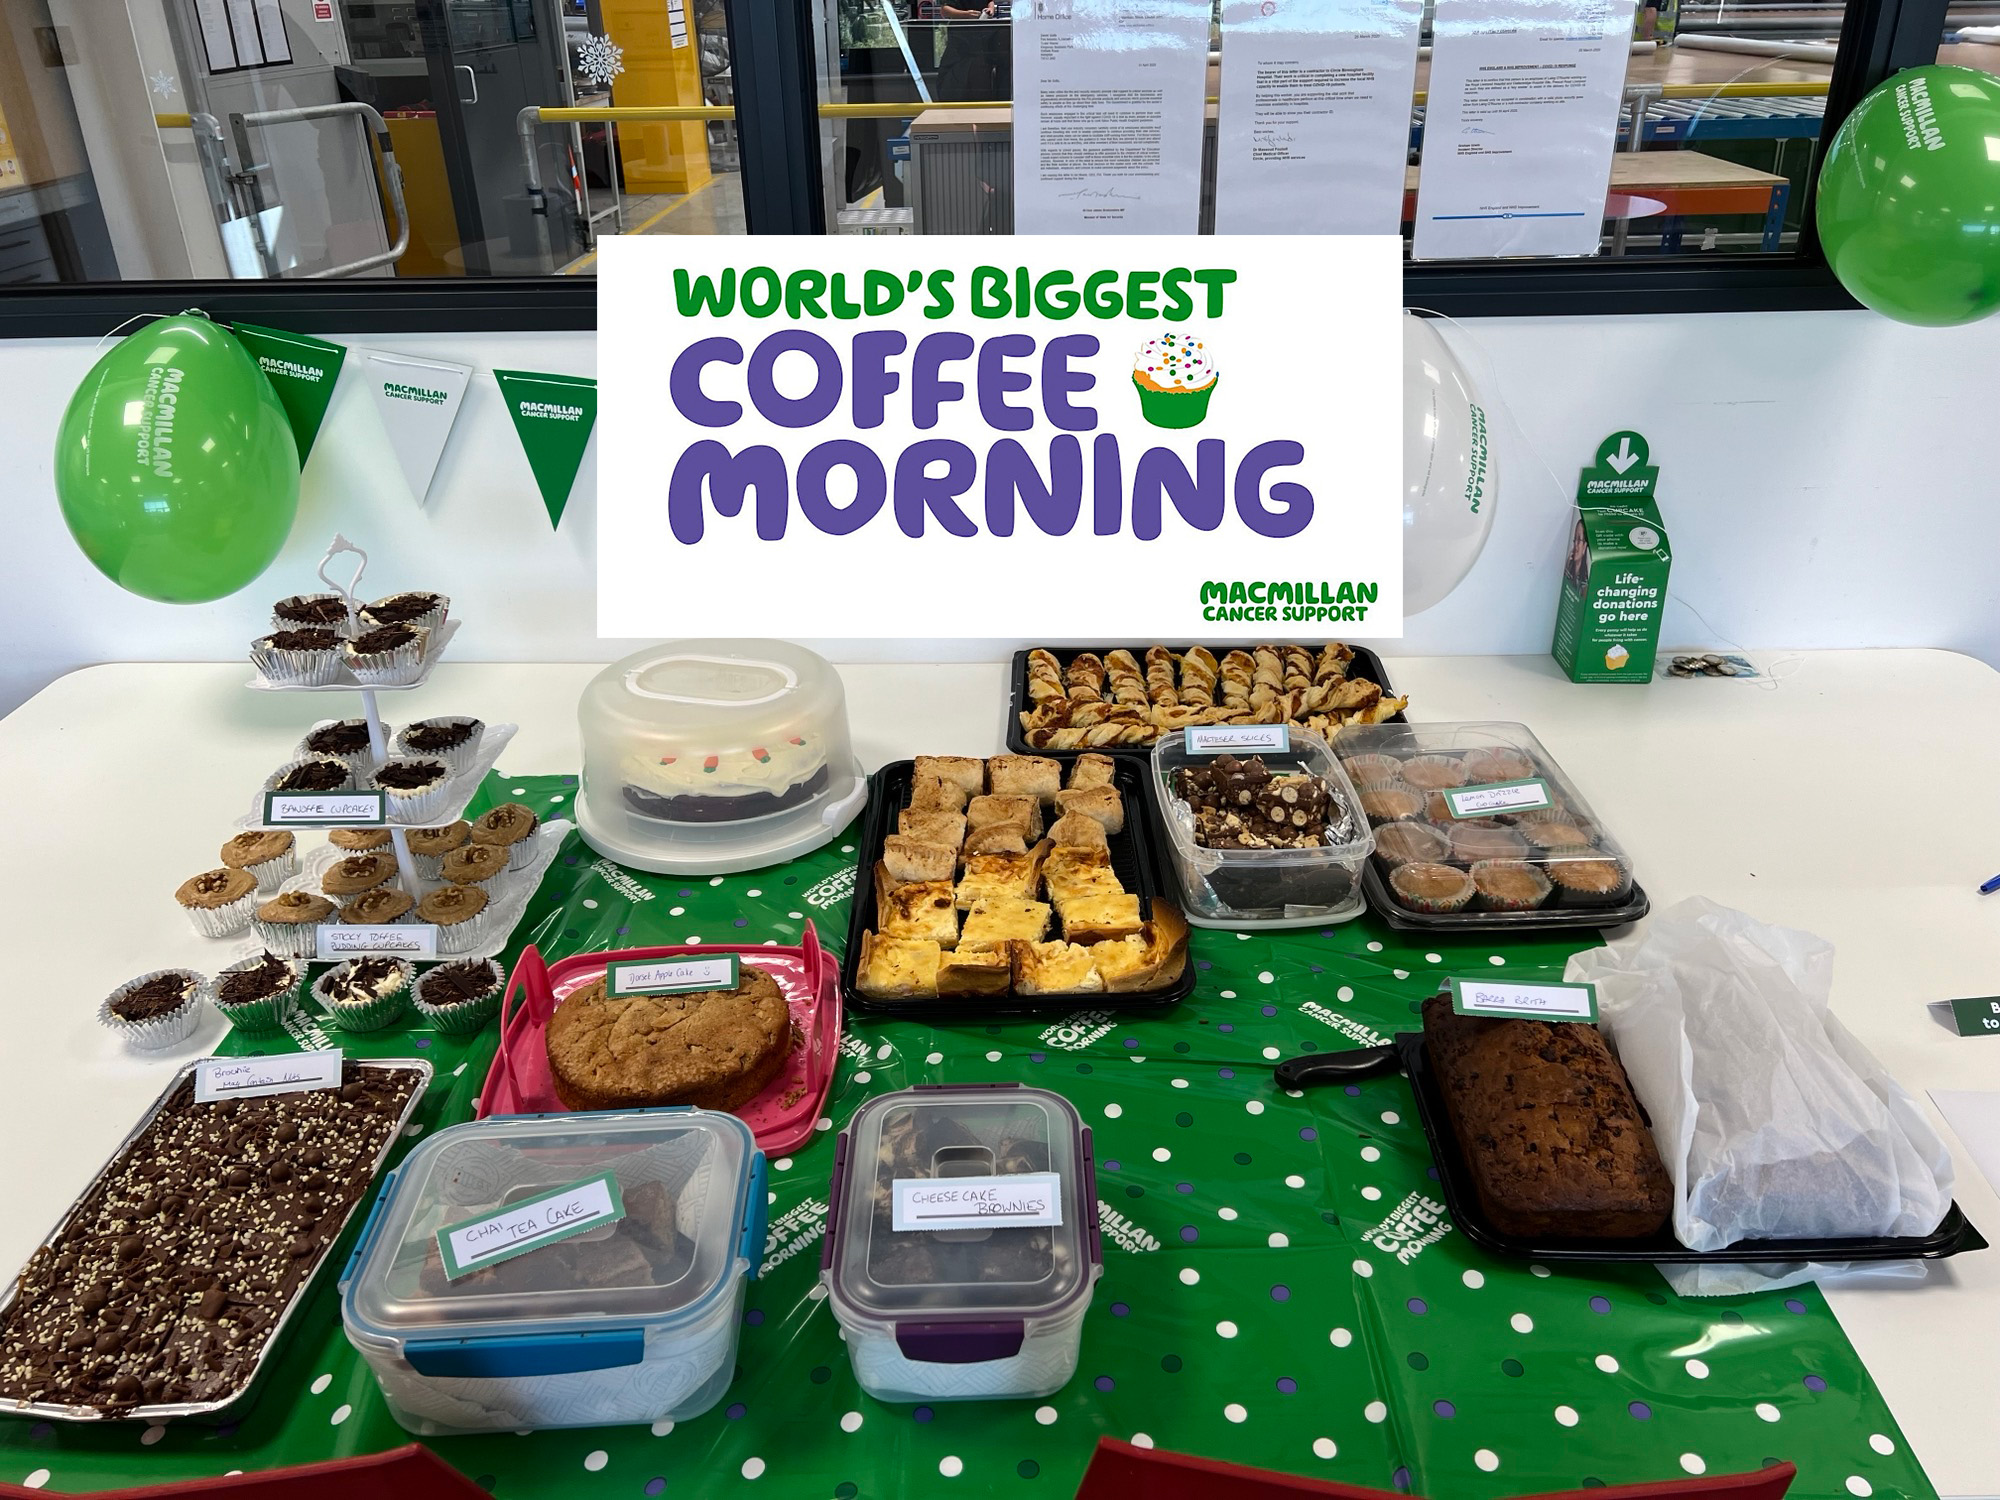 Coopers Fire Raise Money for Macmillan Coffee Morning